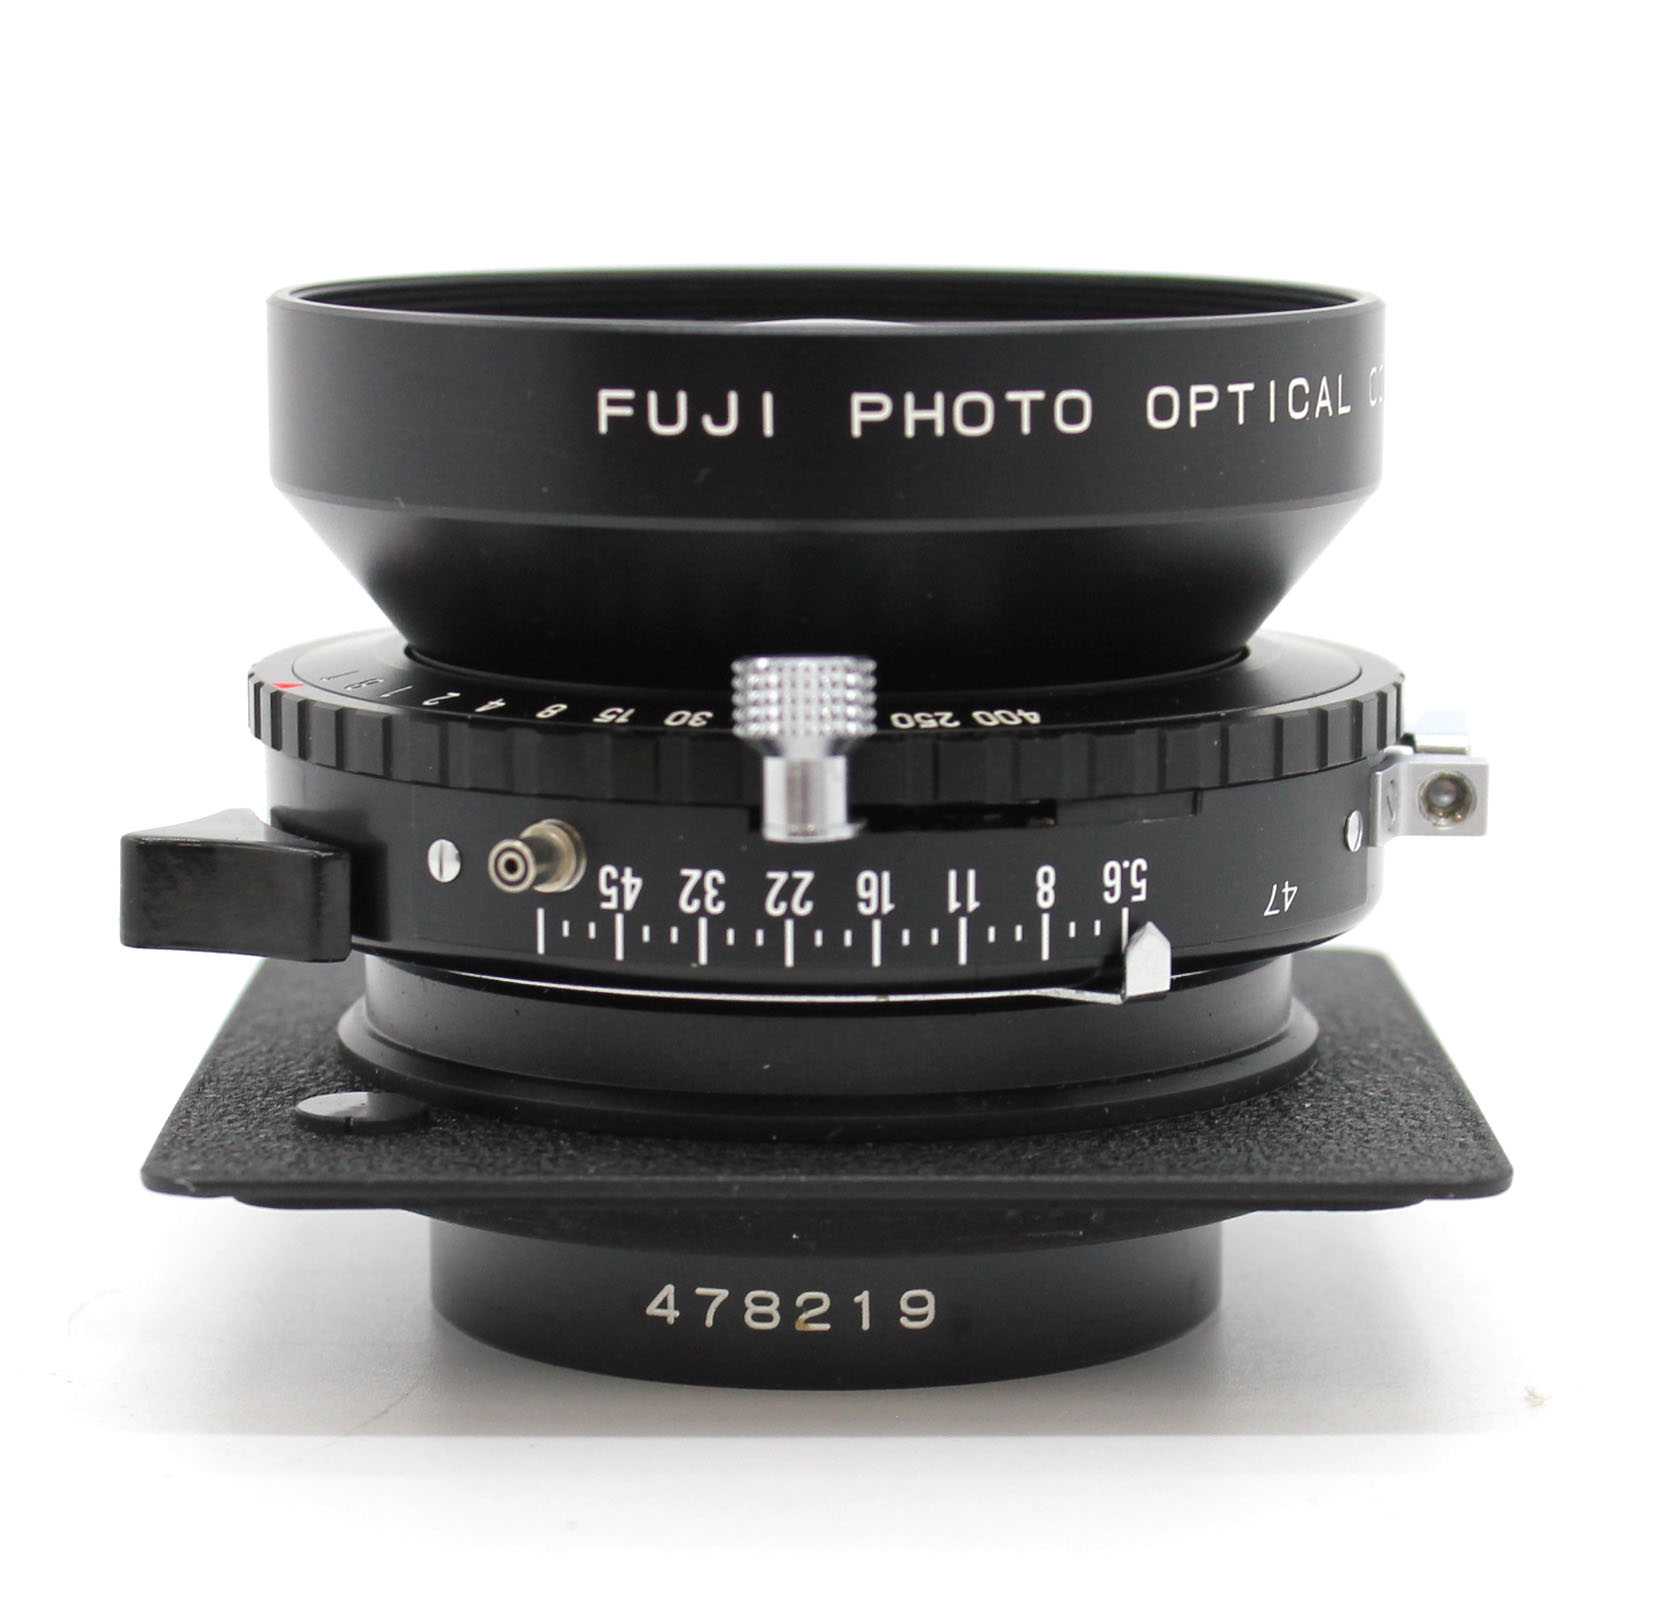  Fuji Fujinon W 180mm F/5.6 4x5 Large Format Lens with Copal Shutter from Japan Photo 4